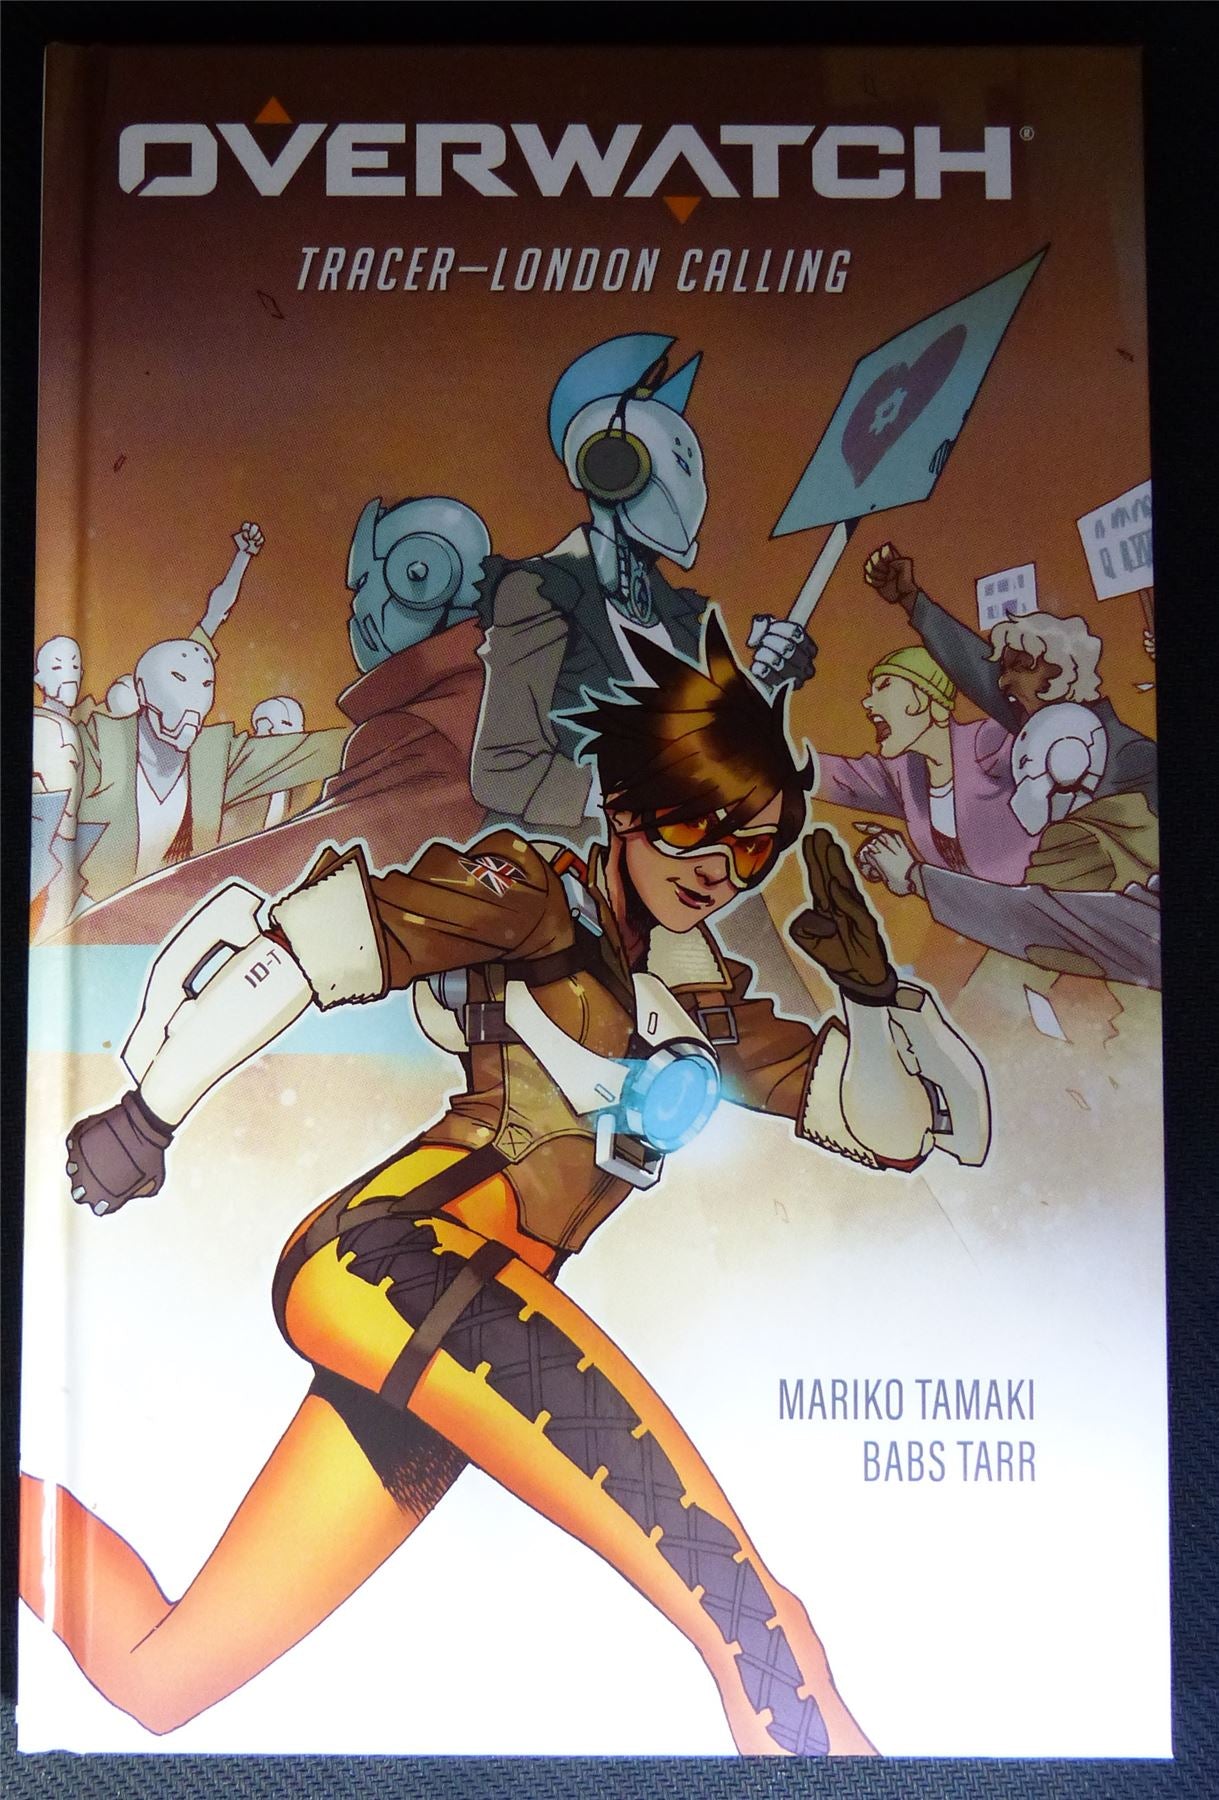 Overwatch Tracer London Calling #1 COKE LE Variant 2 pack Comic Book 2021 |  Comic Books - Modern Age